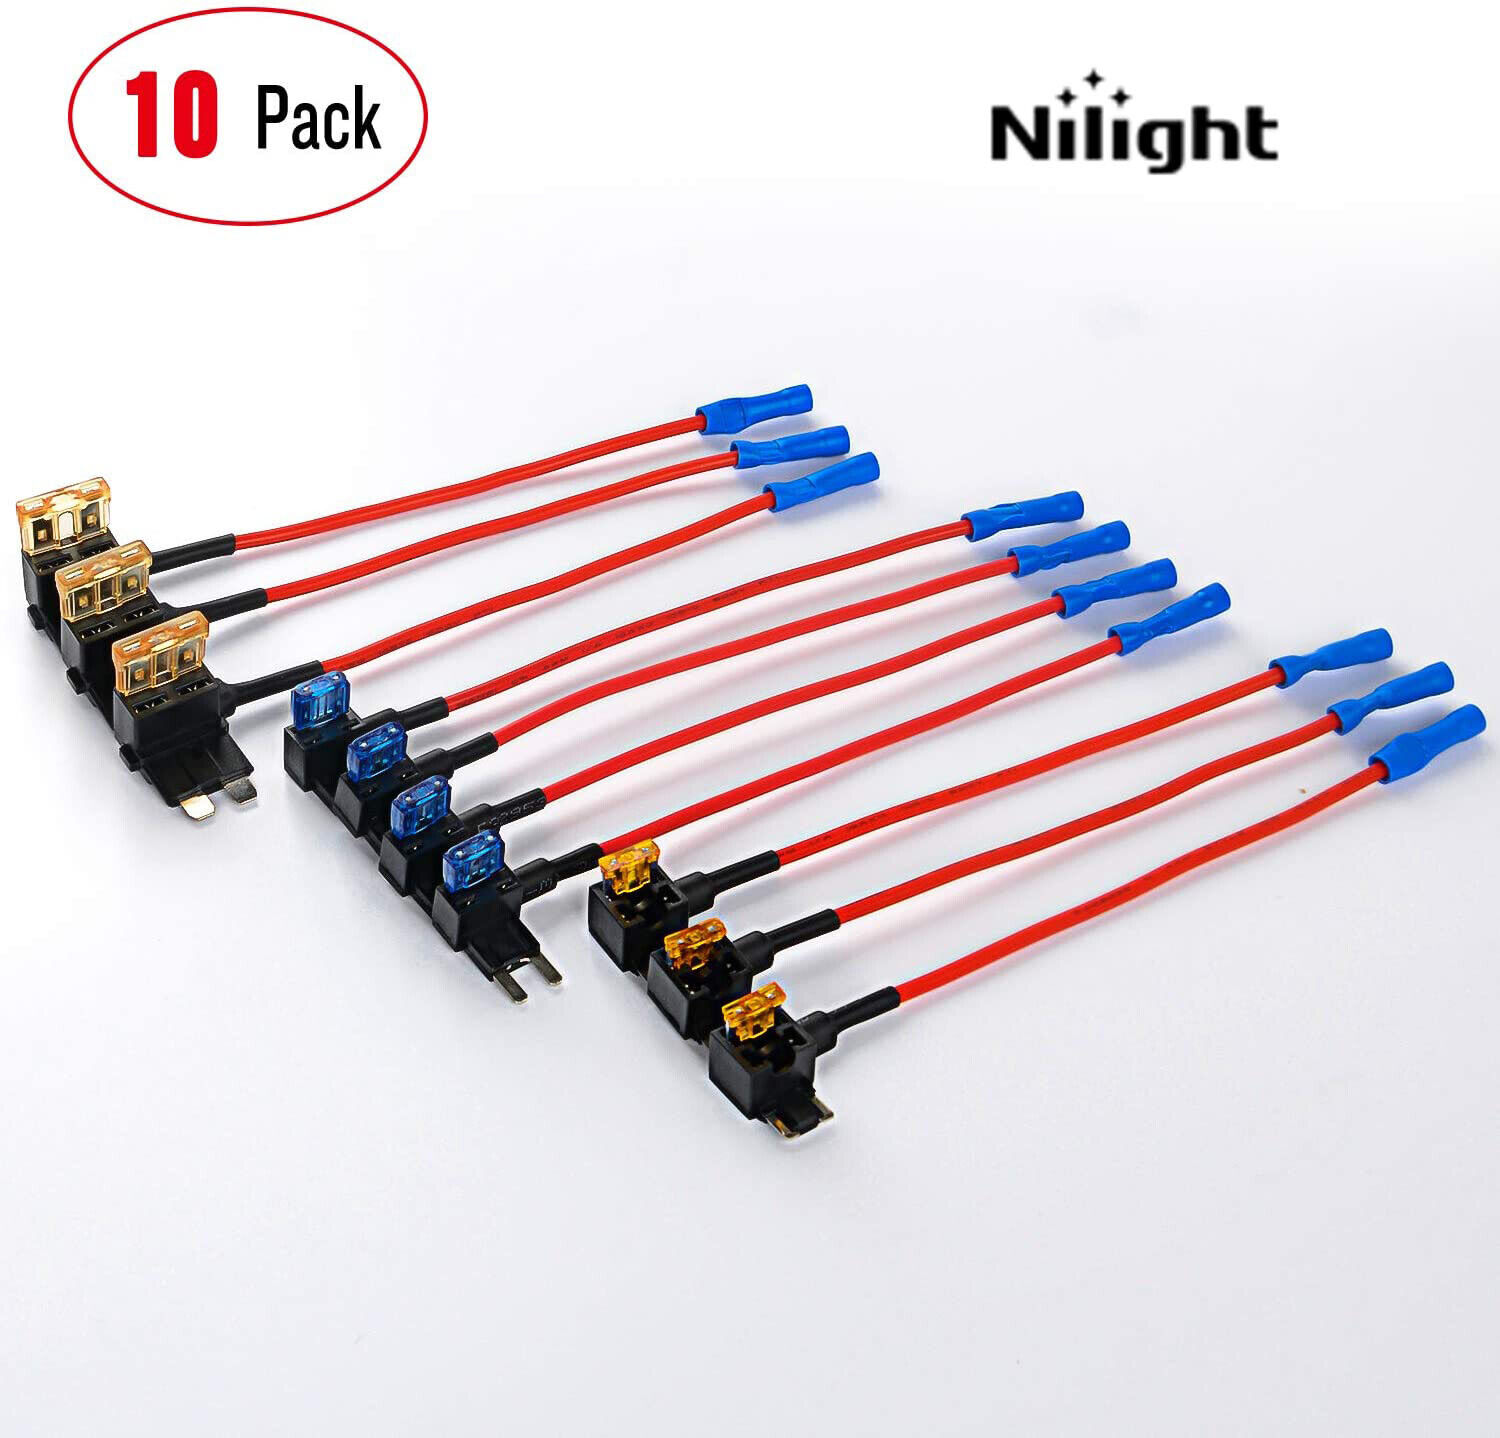 10Pack Car Add-a-Circuit Fuse Adapter w/ Standard & Mini TAP Blade Fuse Holder Nilight 50040R